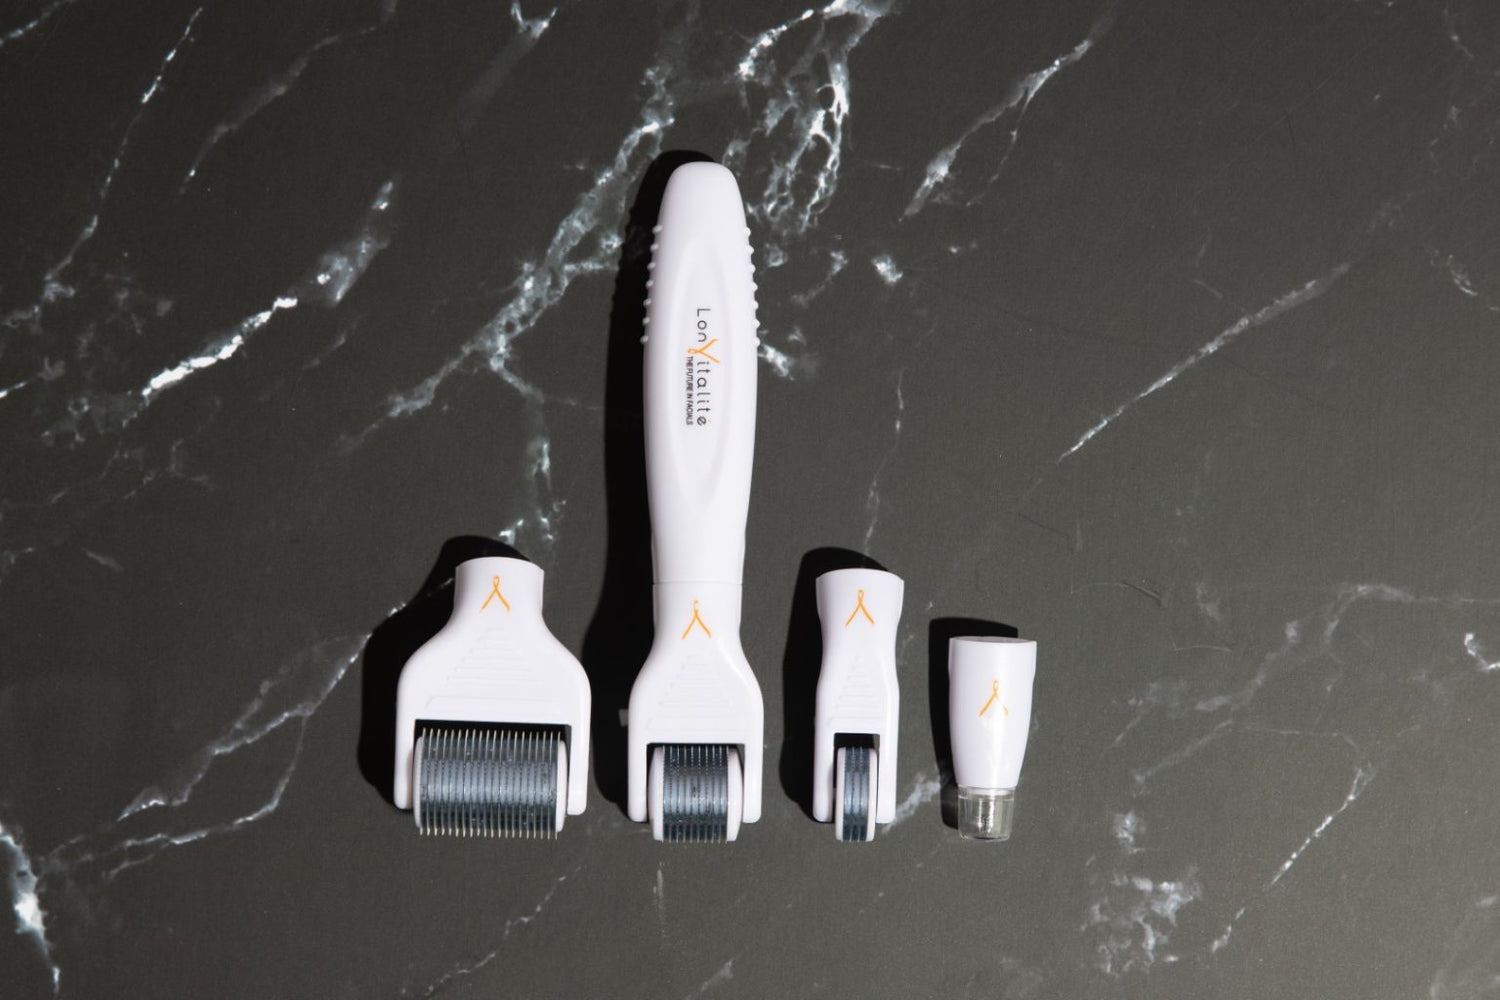 The Benefits Of Microneedling Your Skin: How To Use A Derma-Roller